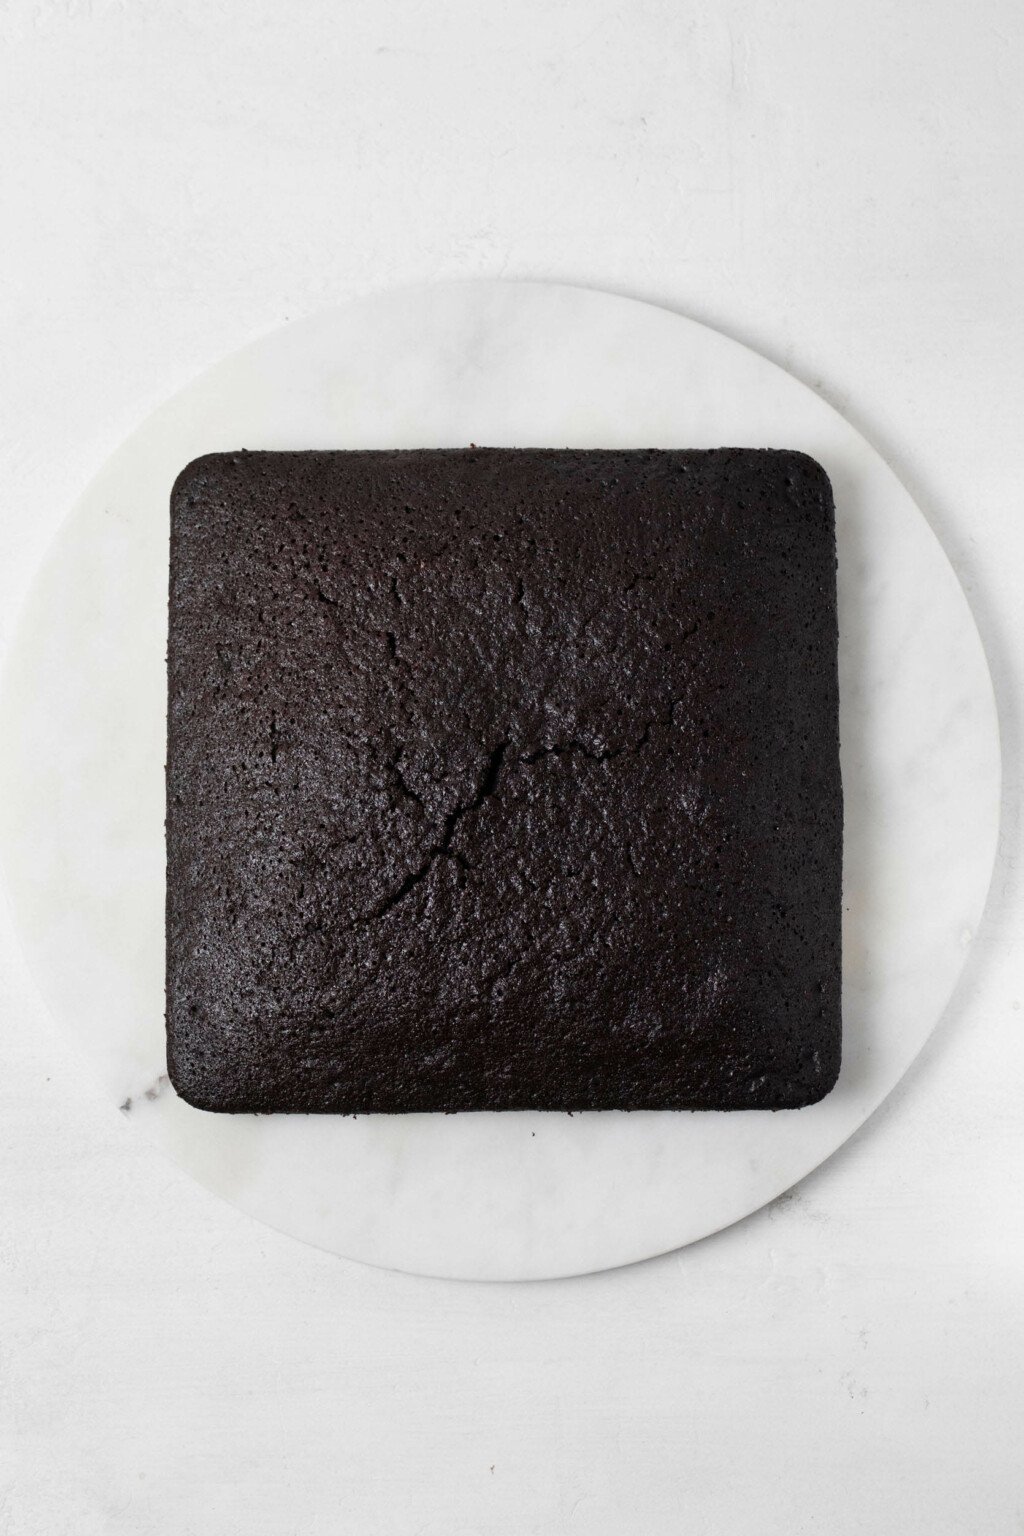 A square, chocolate cake resting on a round, white marble dish.